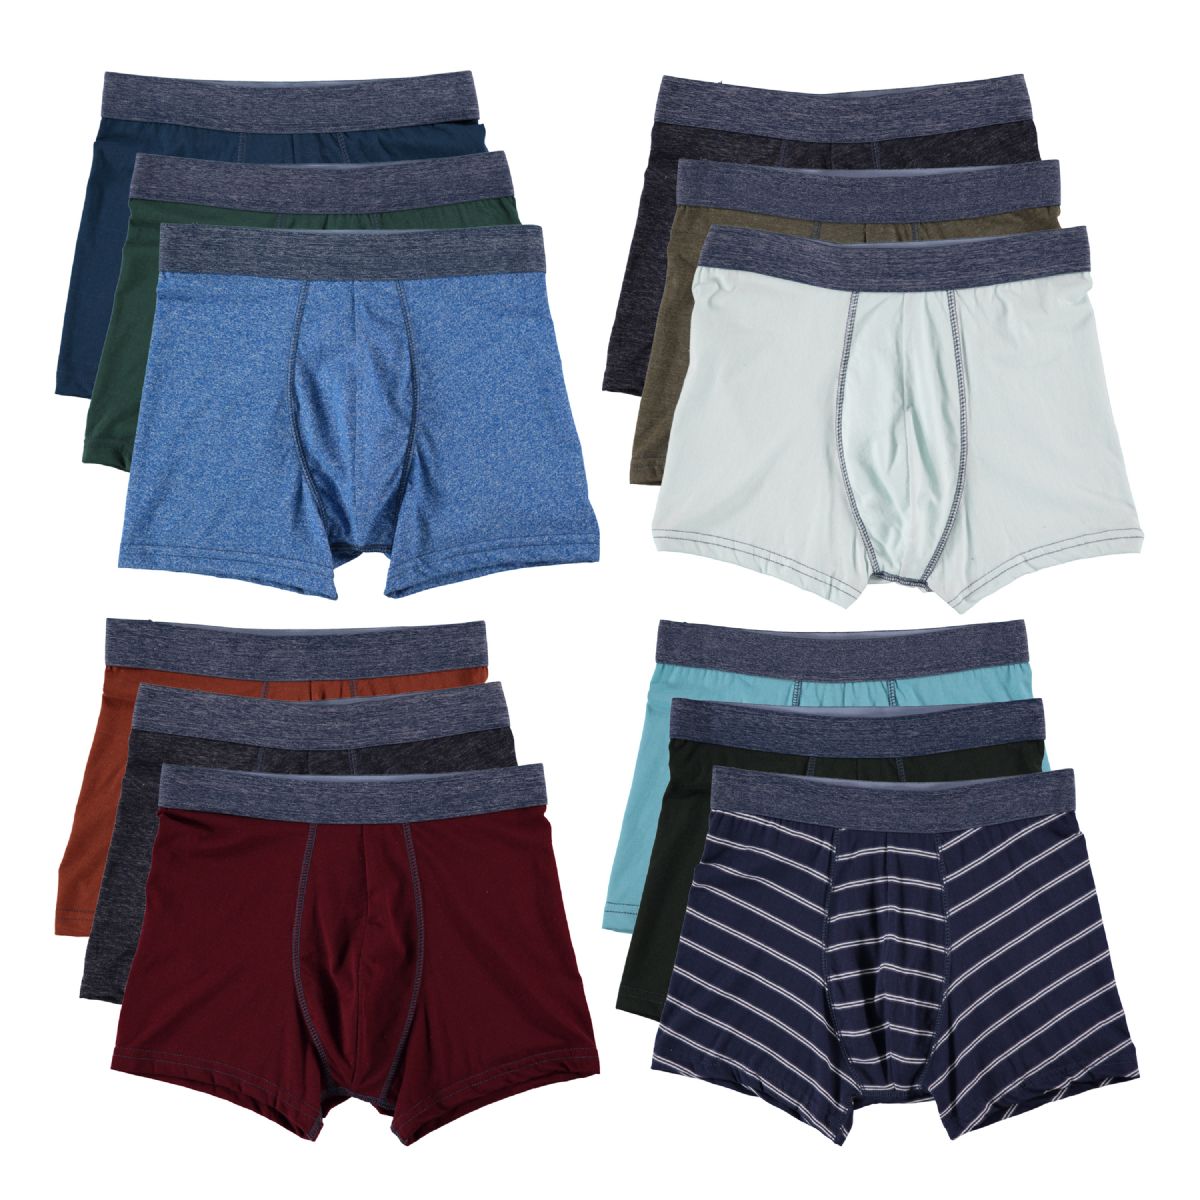 72 Pieces Yacht & Smith Mens 100% Cotton Boxer Brief Assorted Colors Size Small - Mens Underwear